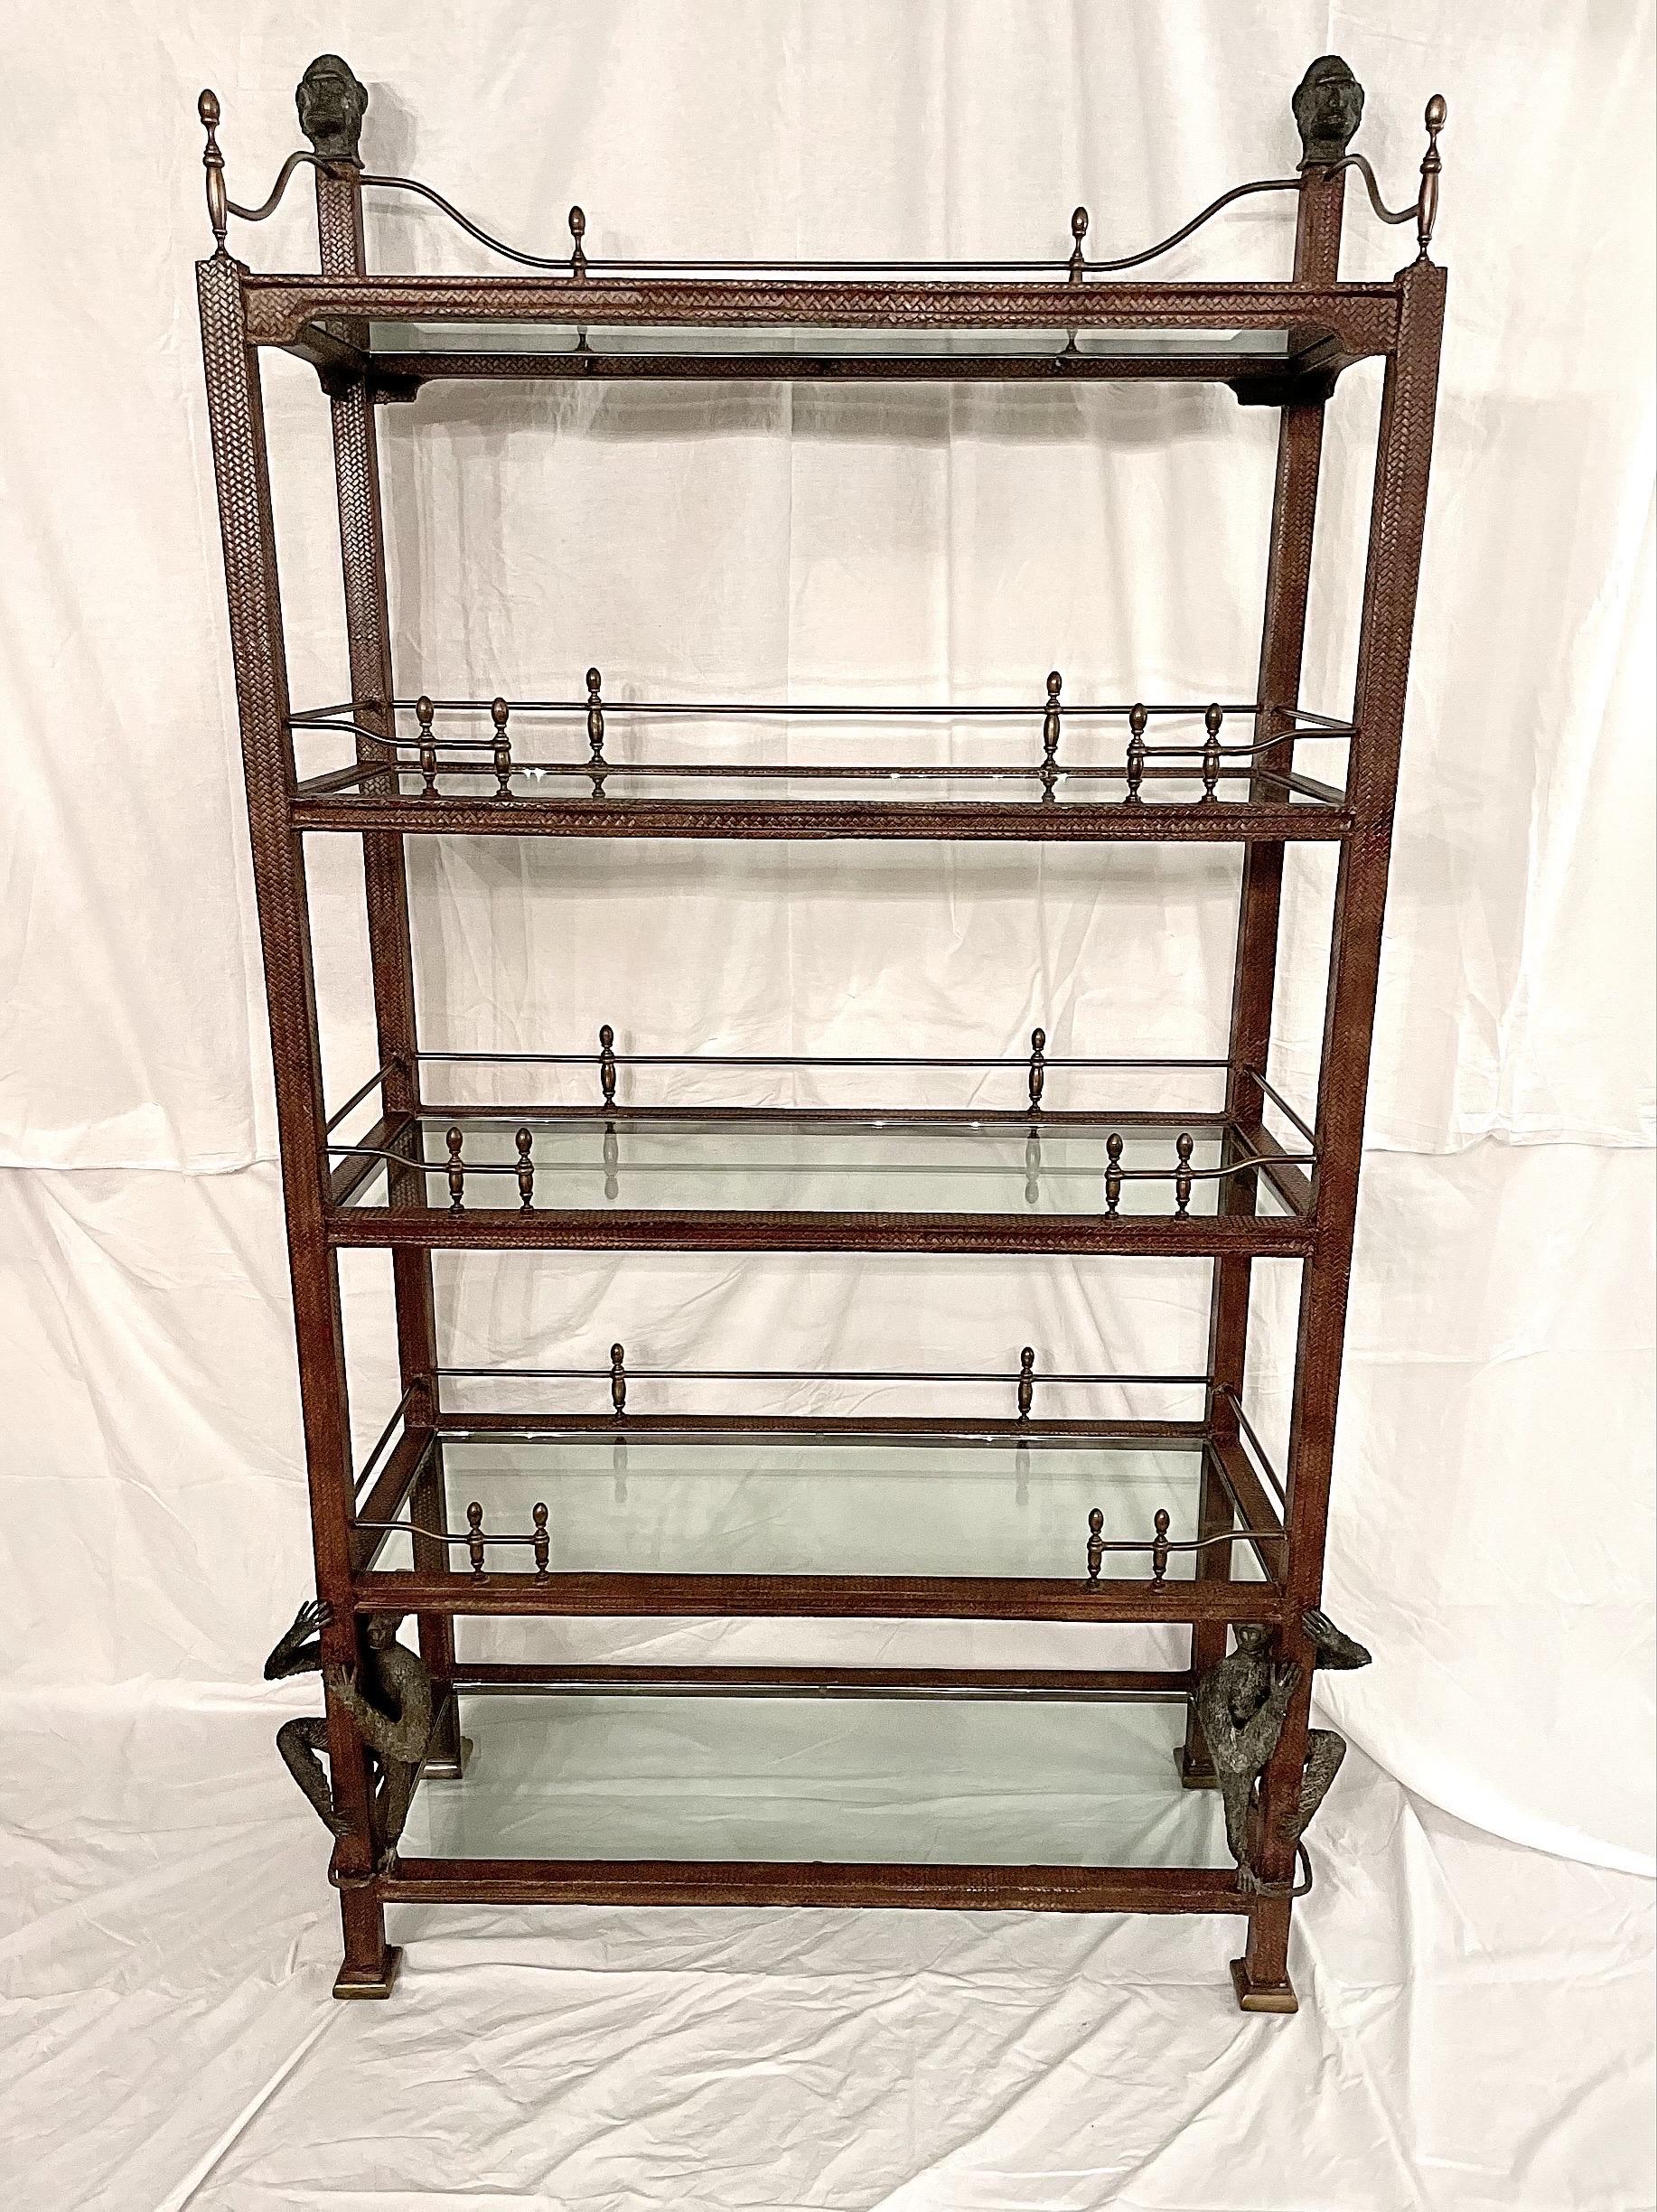 Maitland - Smith Regency Bookcase 5 Shelf Etagere Leather With Brass Rails Finia In Good Condition For Sale In Cookeville, TN